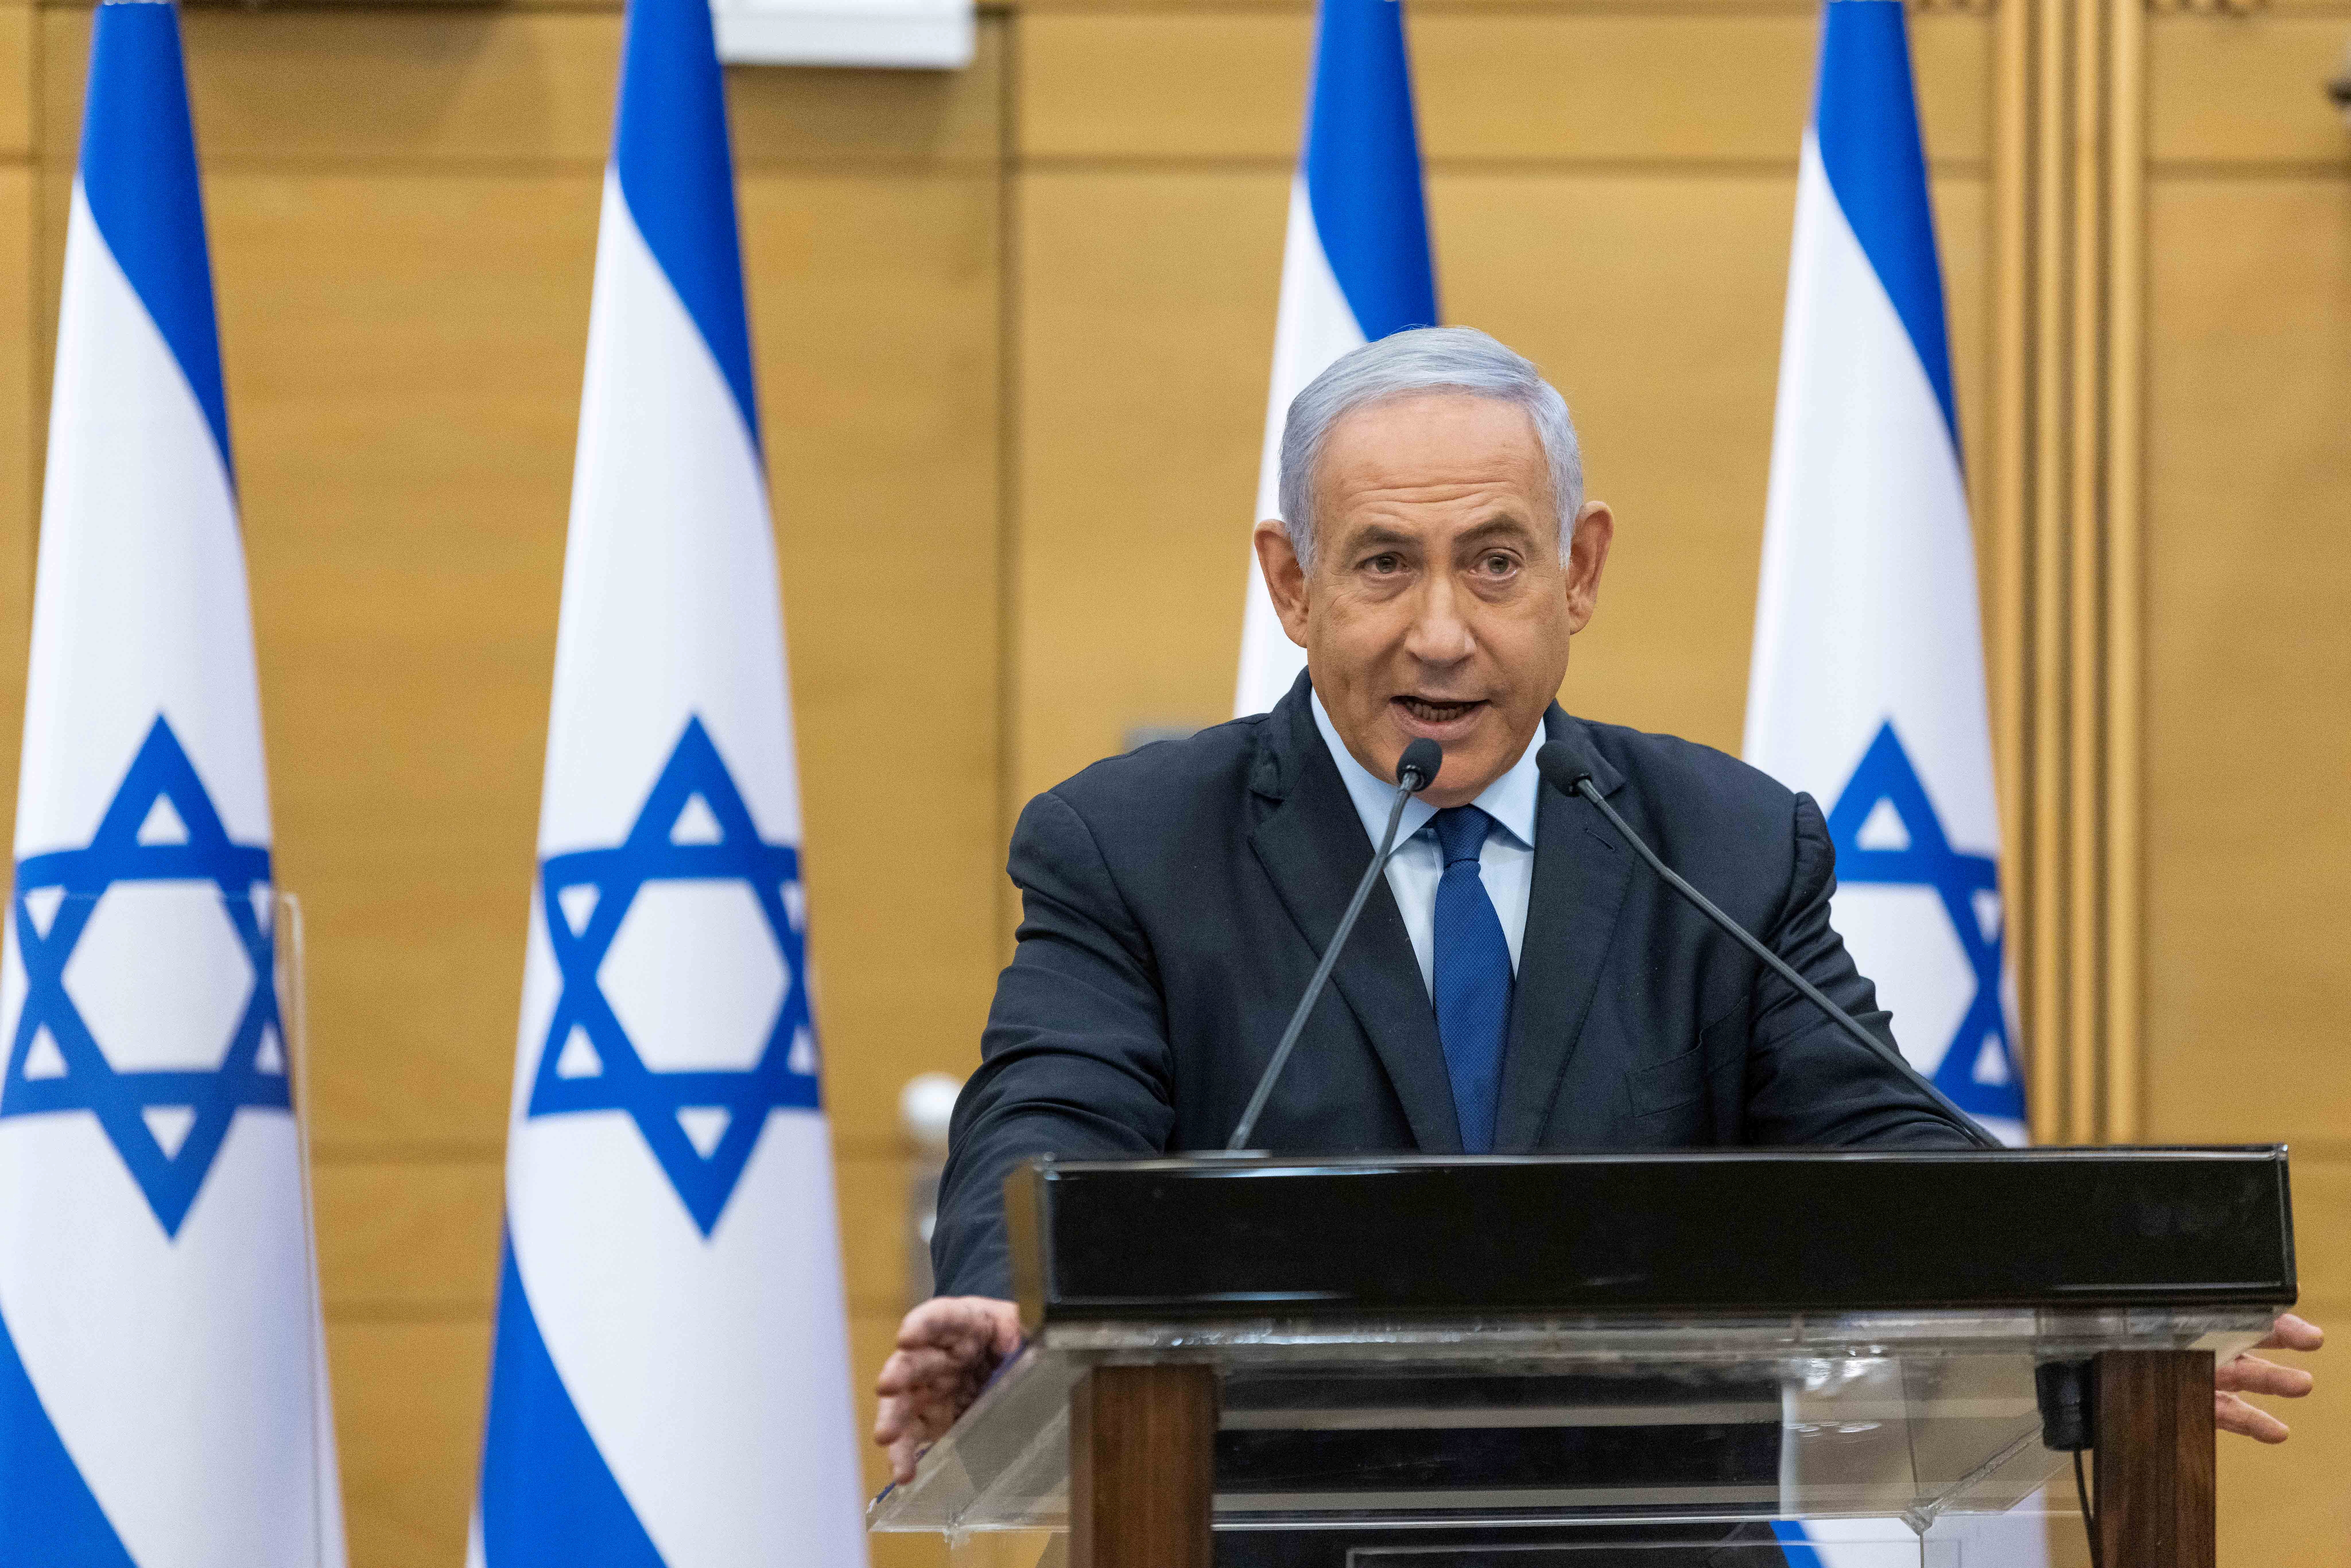 Israeli Prime Minister Benjamin Netanyahu delivers a statement in the Knesset, the Israeli Parliament, in Jerusalem